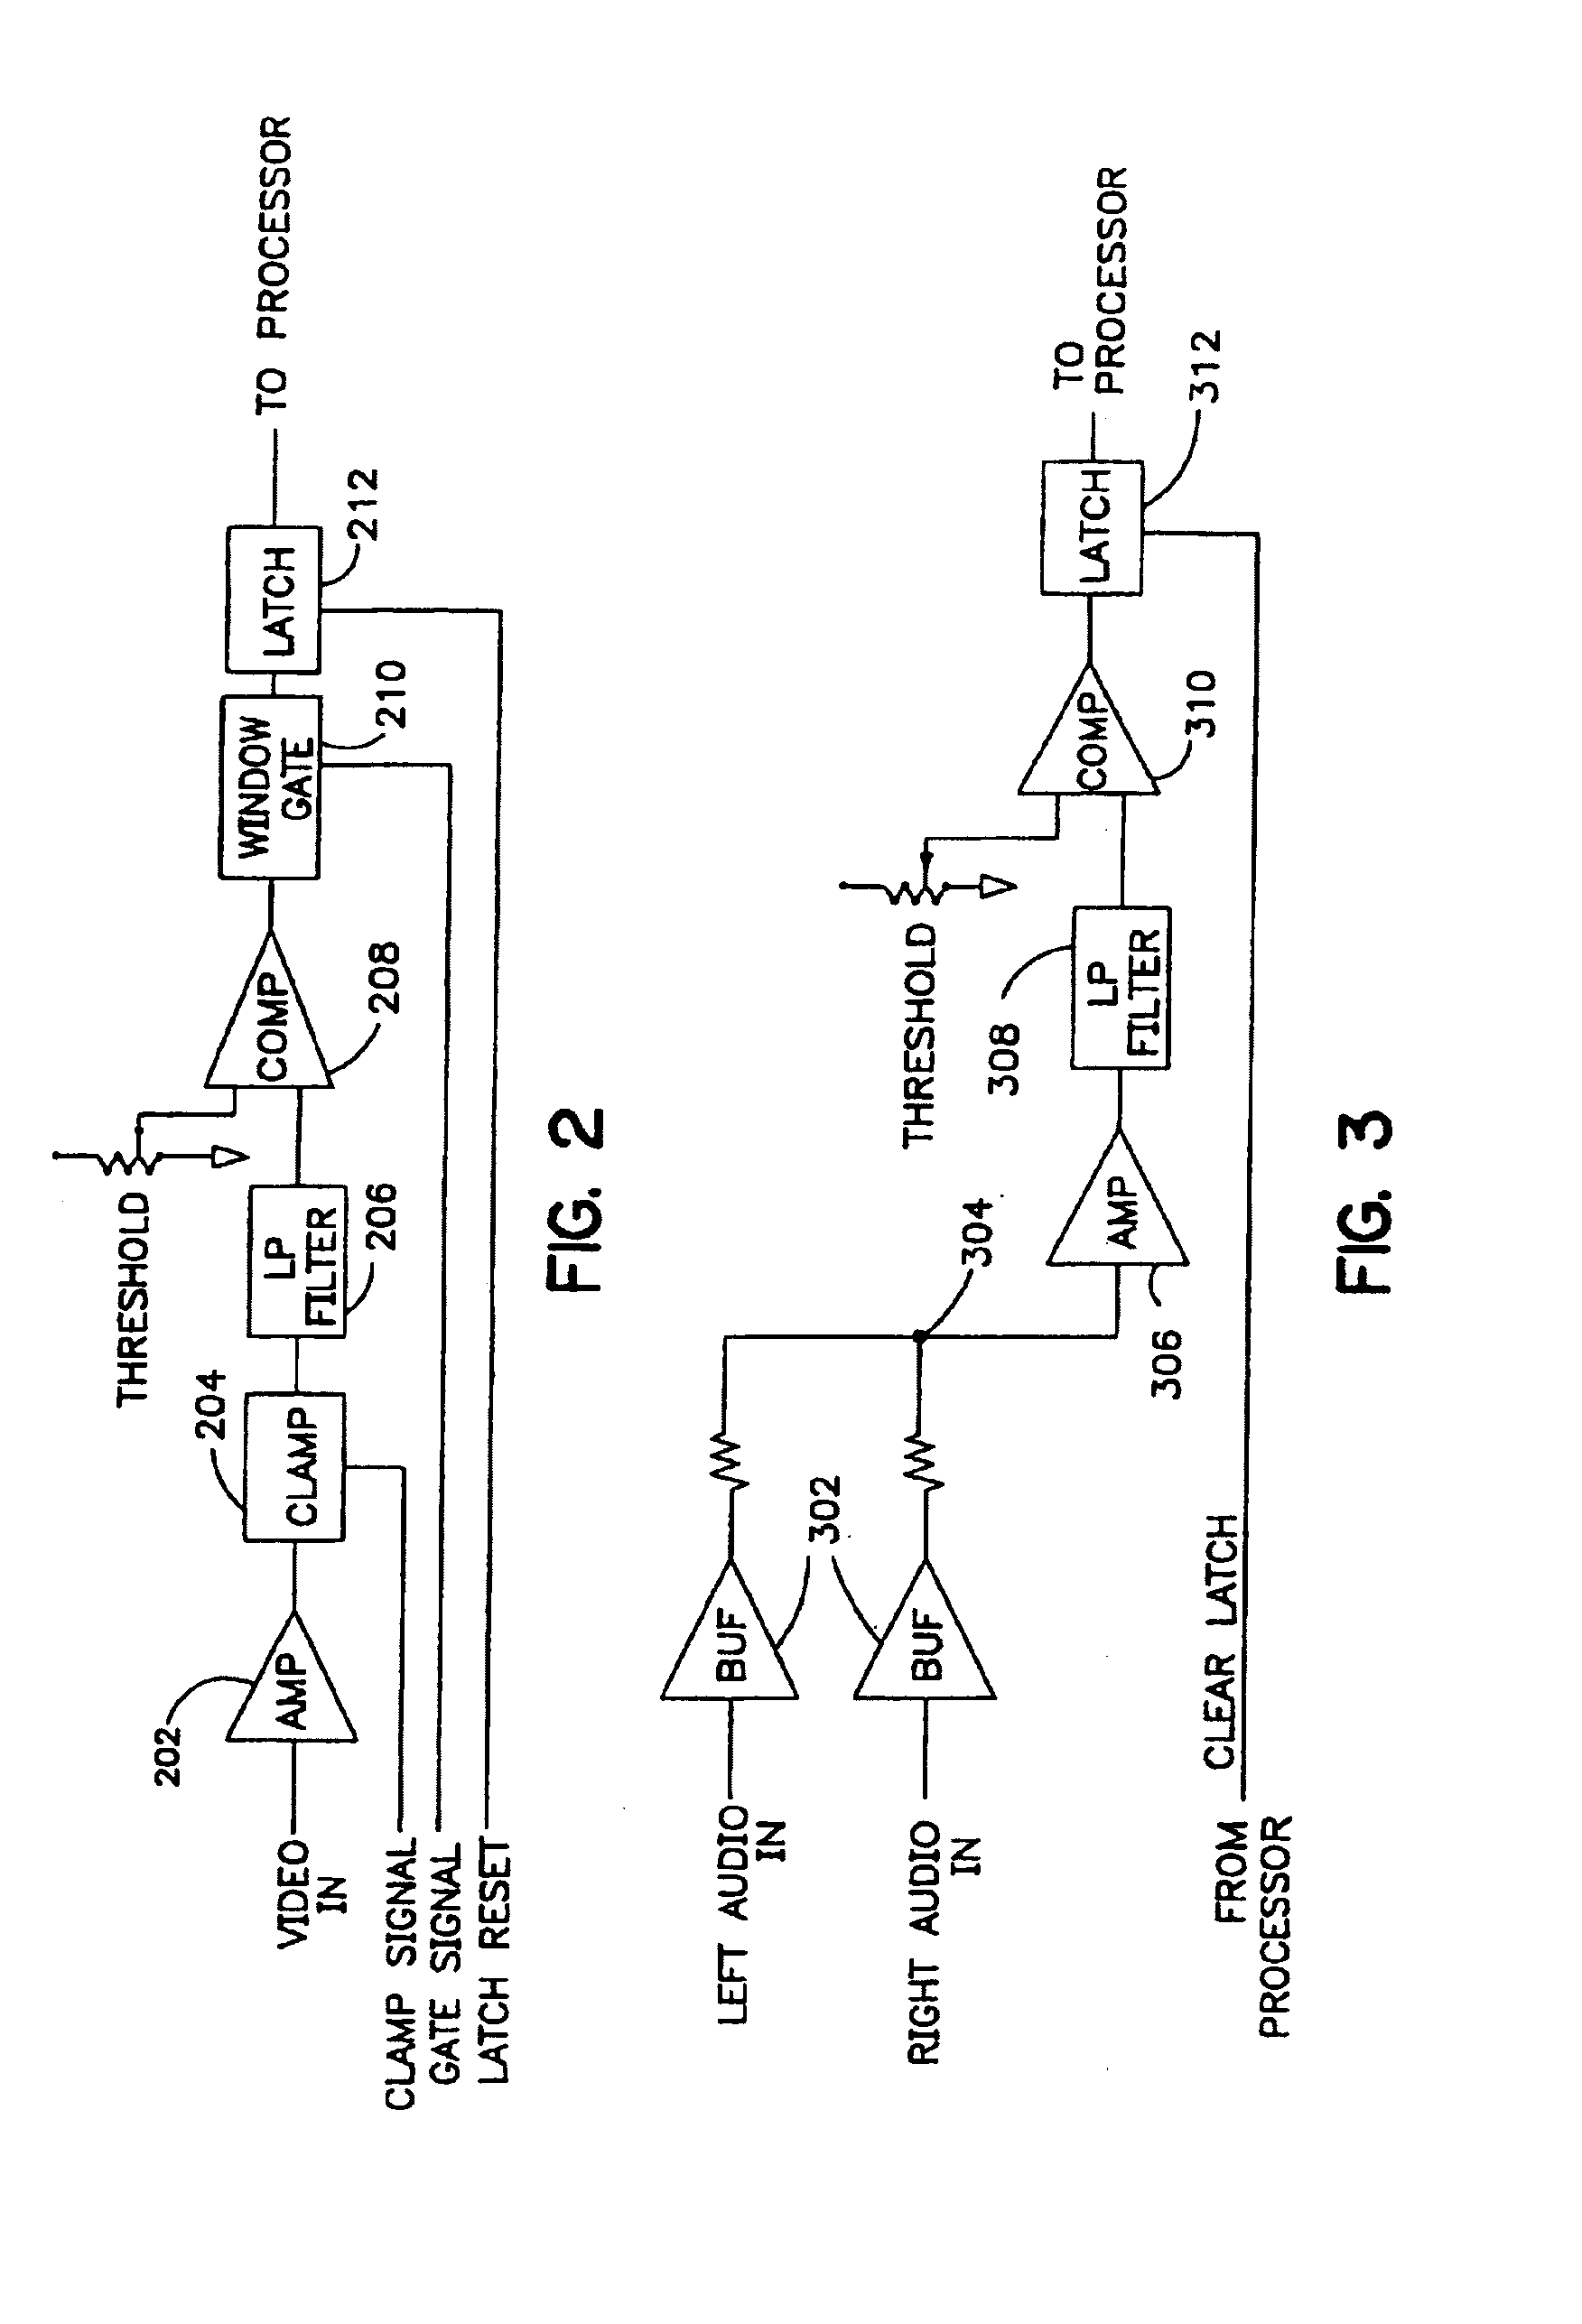 Method and apparatus for eliminating television commercial messages